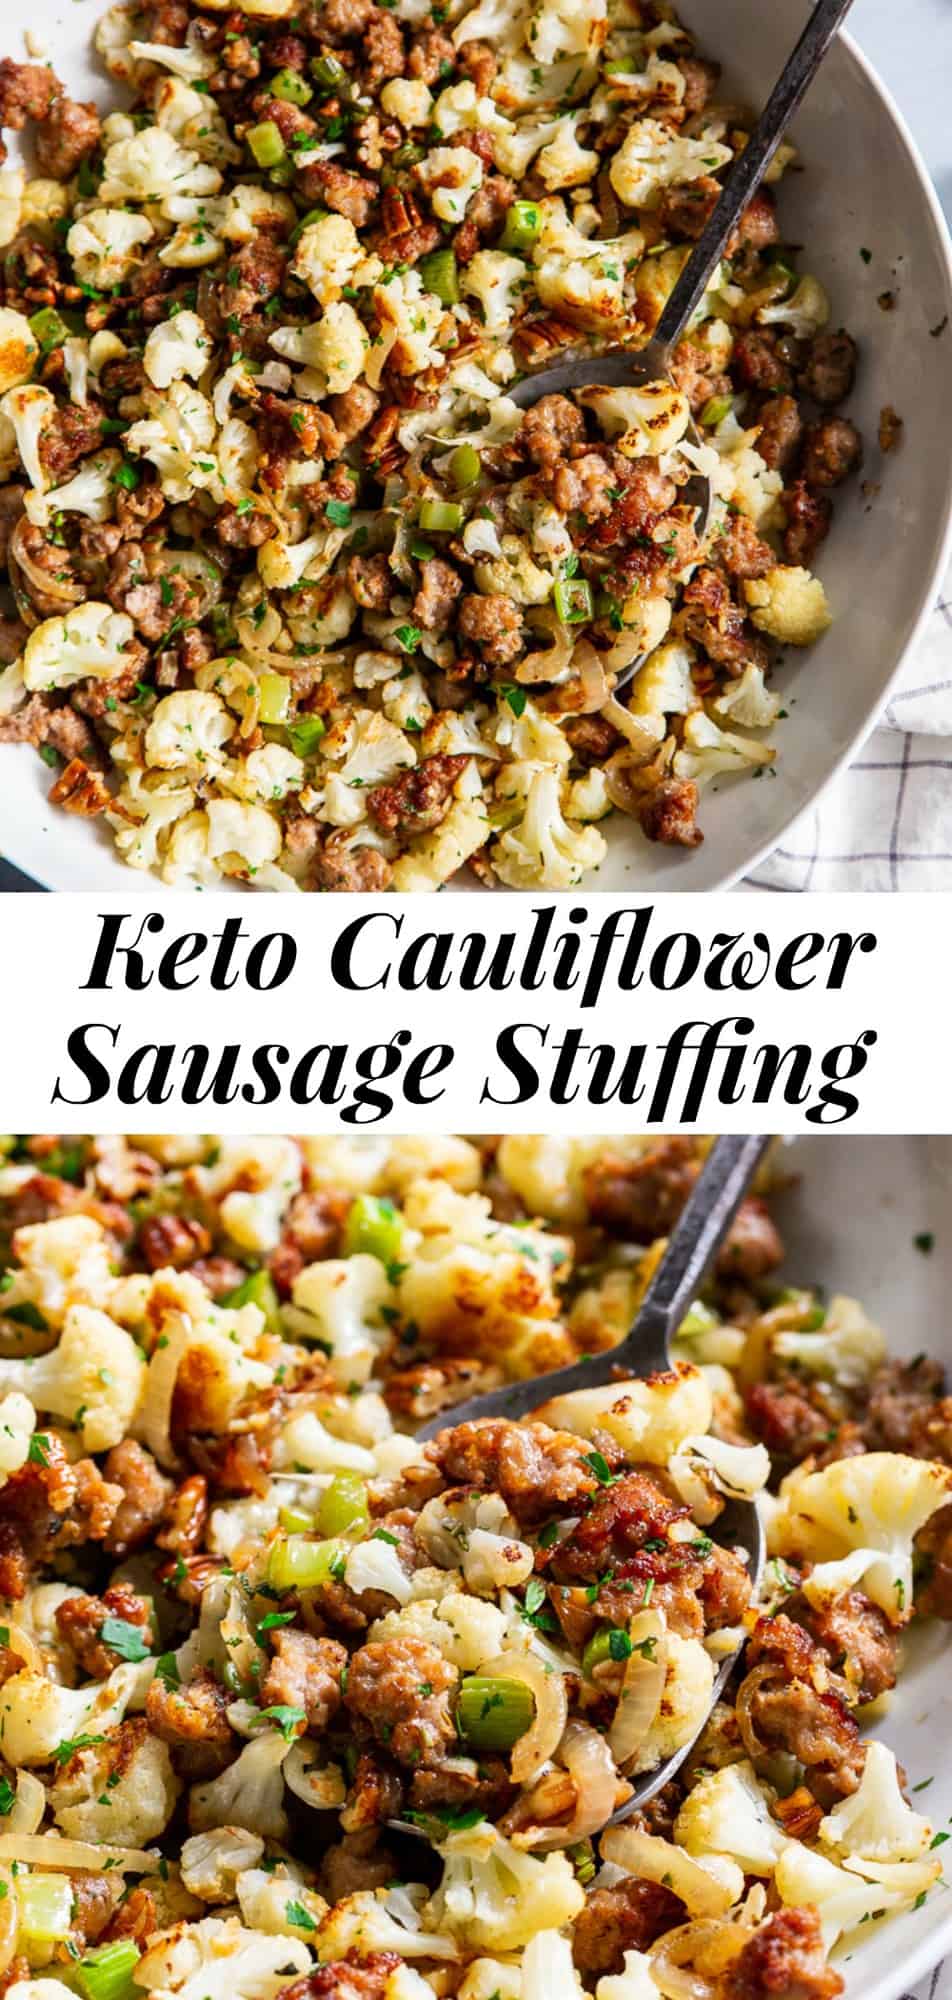 This cauliflower stuffing is packed with goodies like crispy browned sausage, caramelized onions, toasty pecans and savory herbs.  It’s low carb, Whole30 compliant and keto friendly.  It’s sure to be a total showstopper at your holiday table, even for the non-paleo crowd! #keto #paleo #cleaneating #whole30